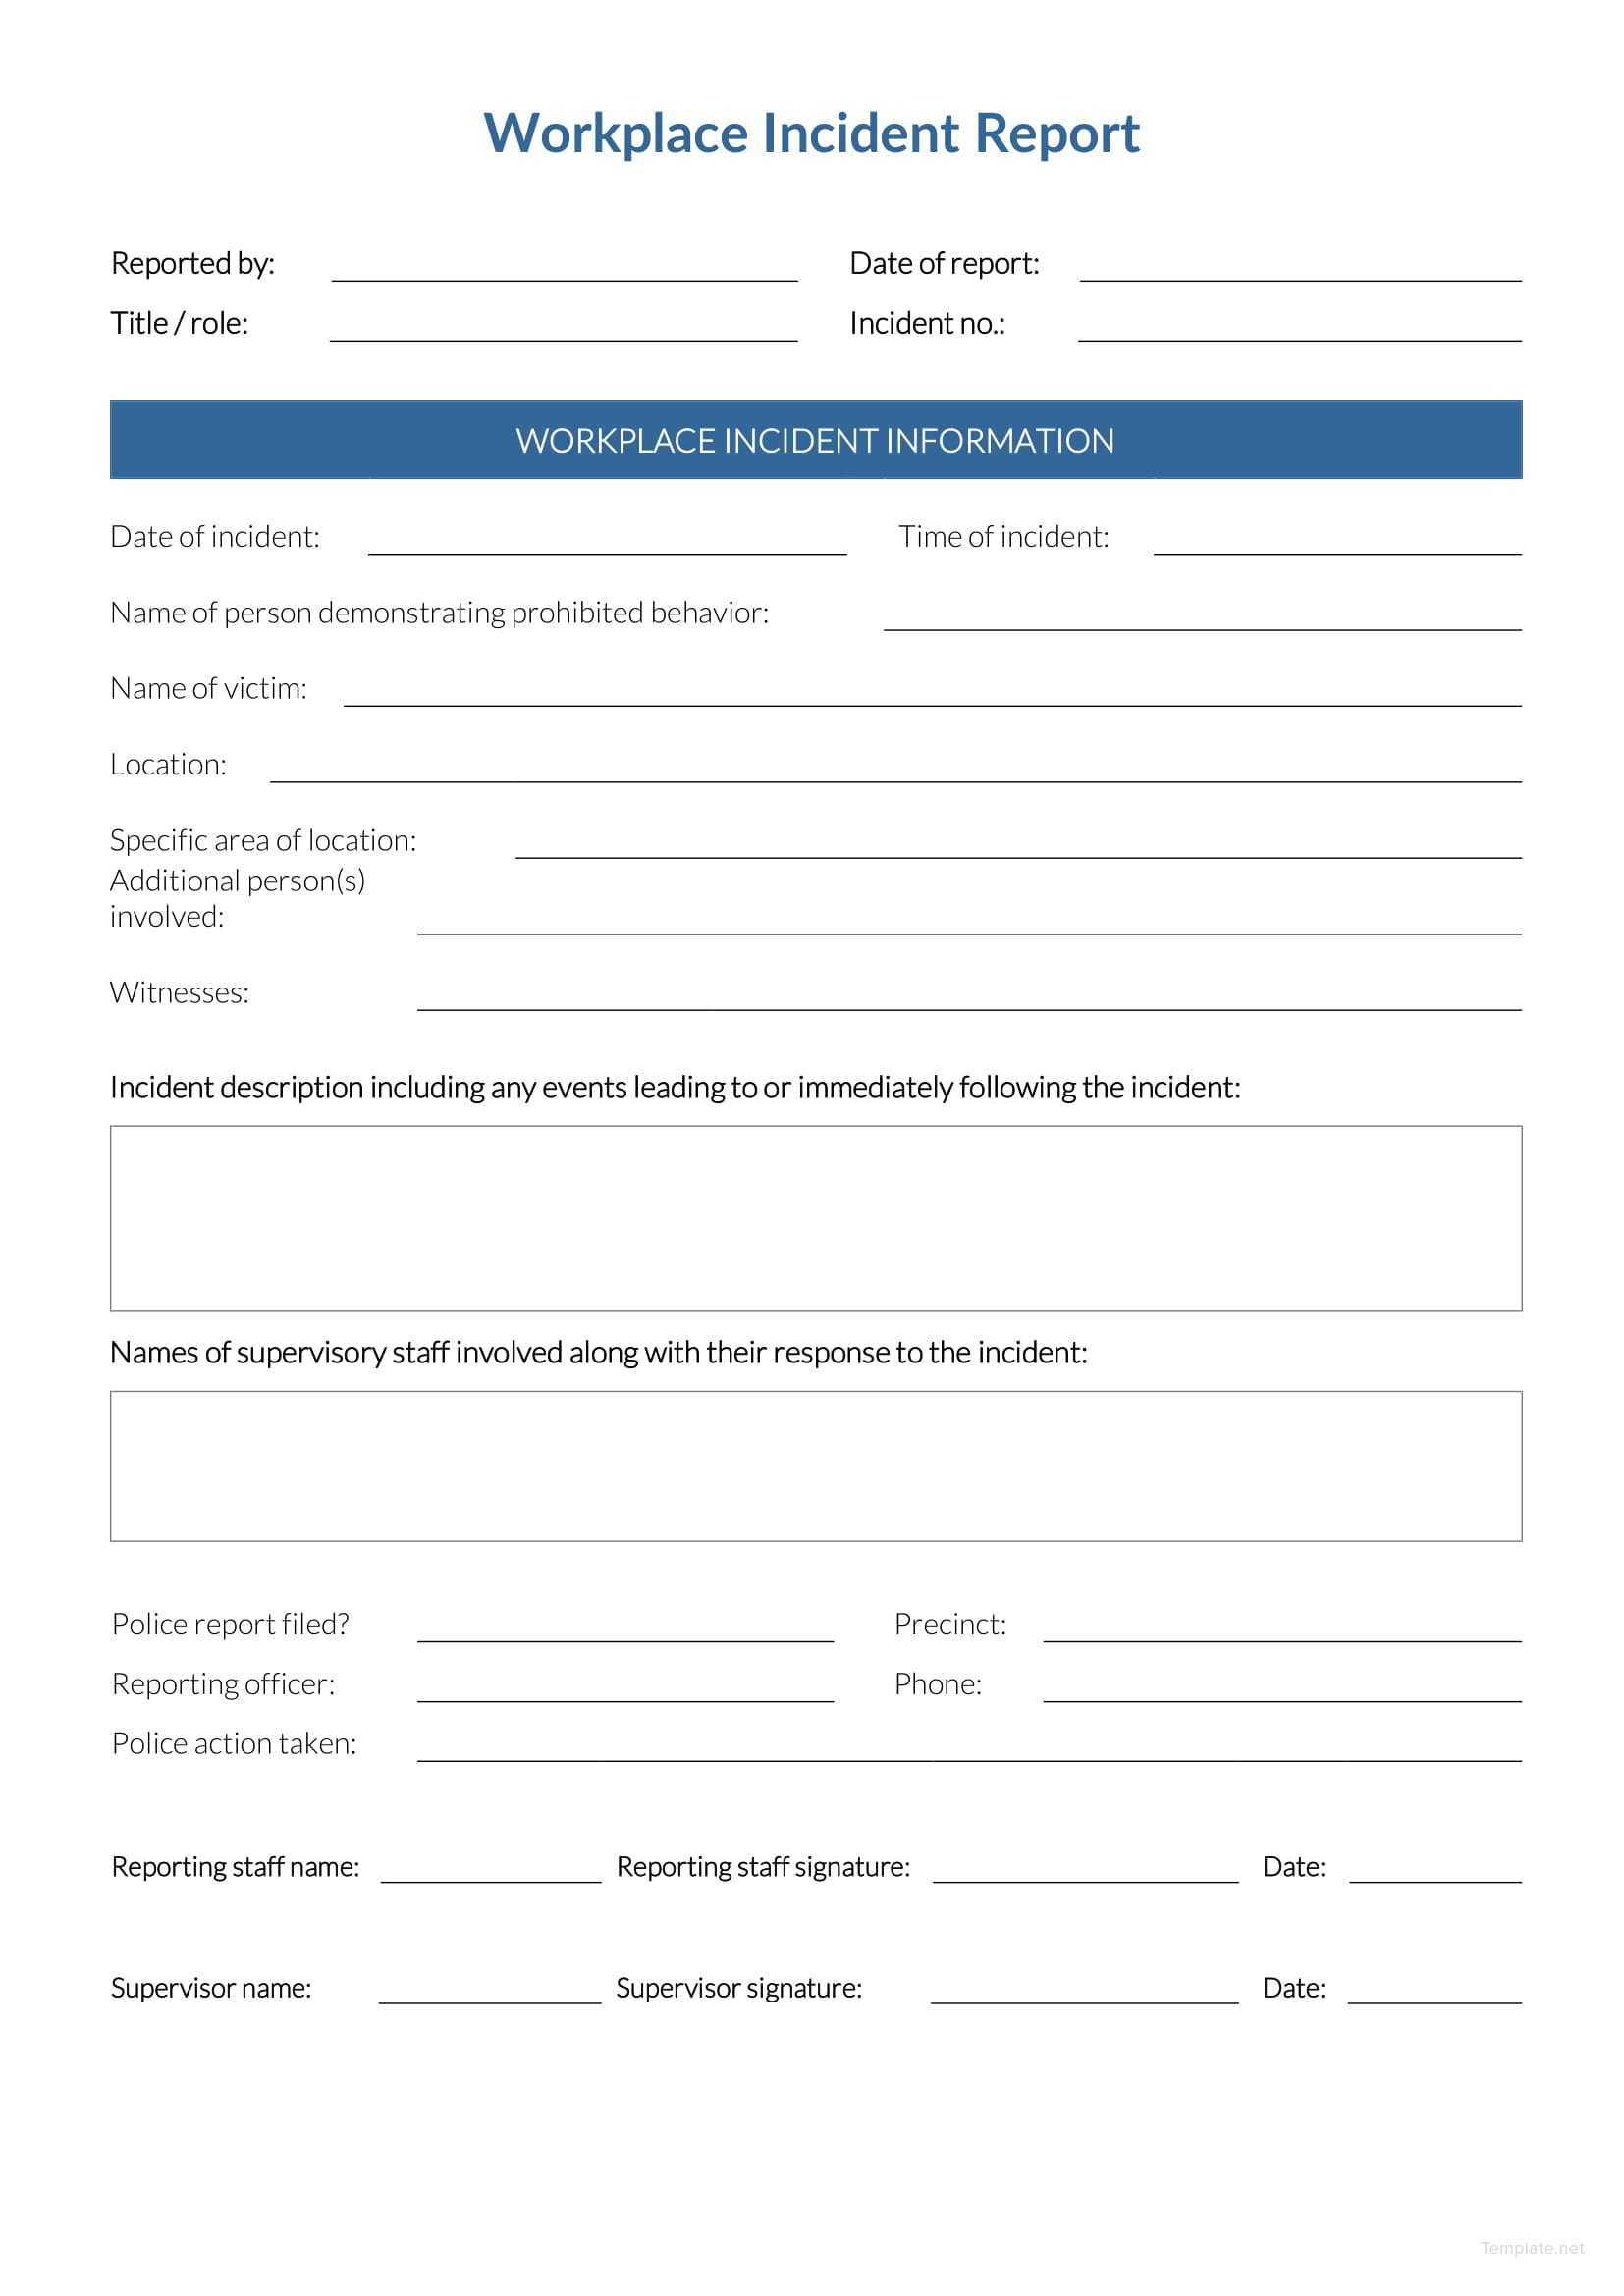 Free Workplace Incident Report | Incident Report, Workplace Throughout Itil Incident Report Form Template